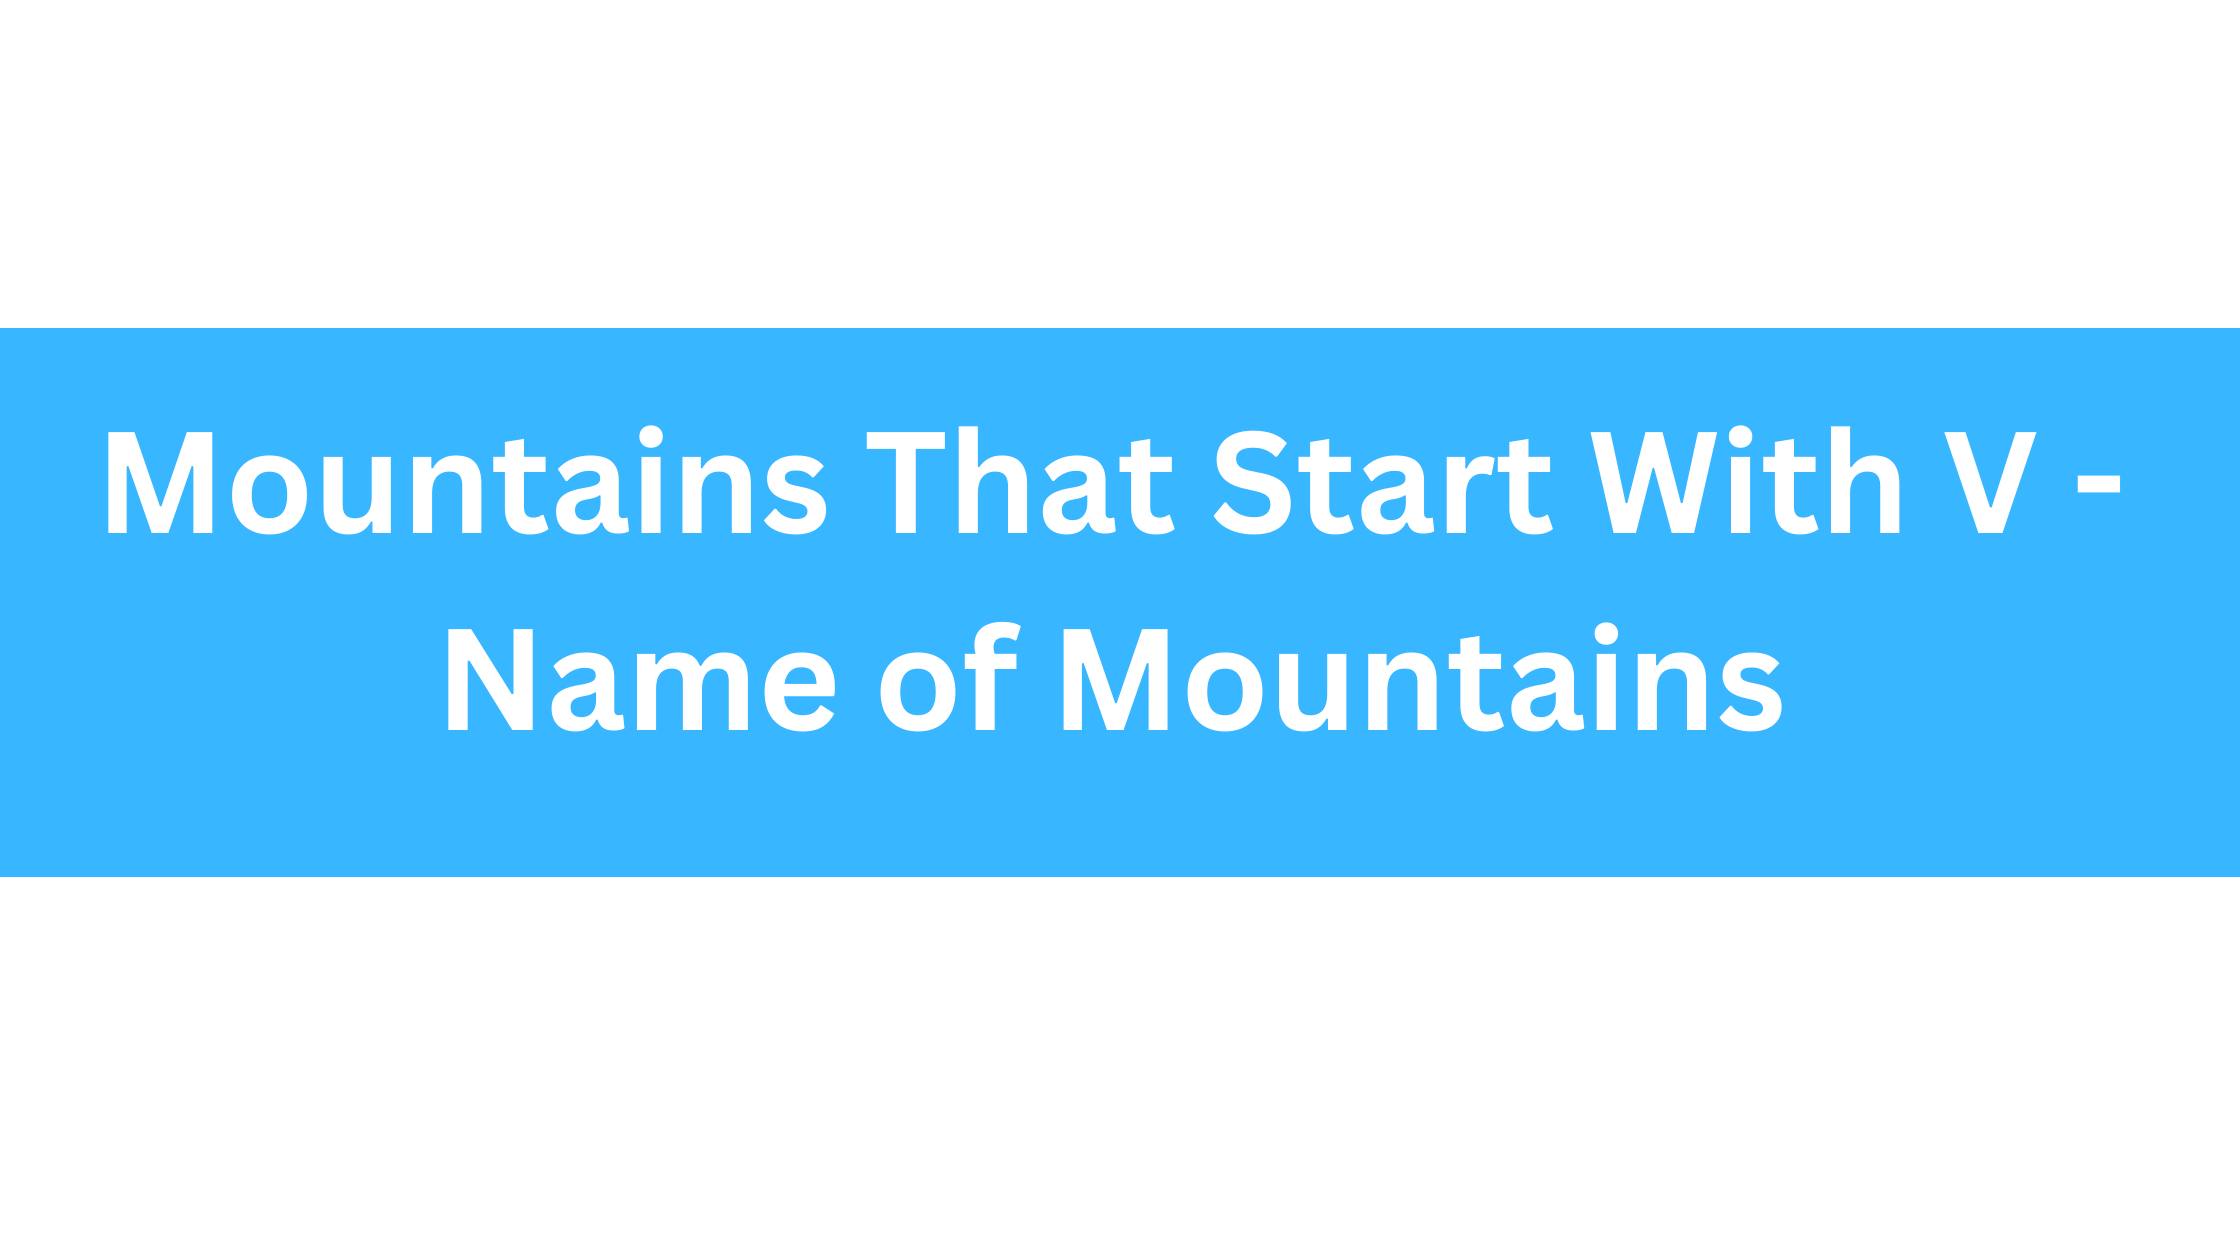 Mountains That Start With V